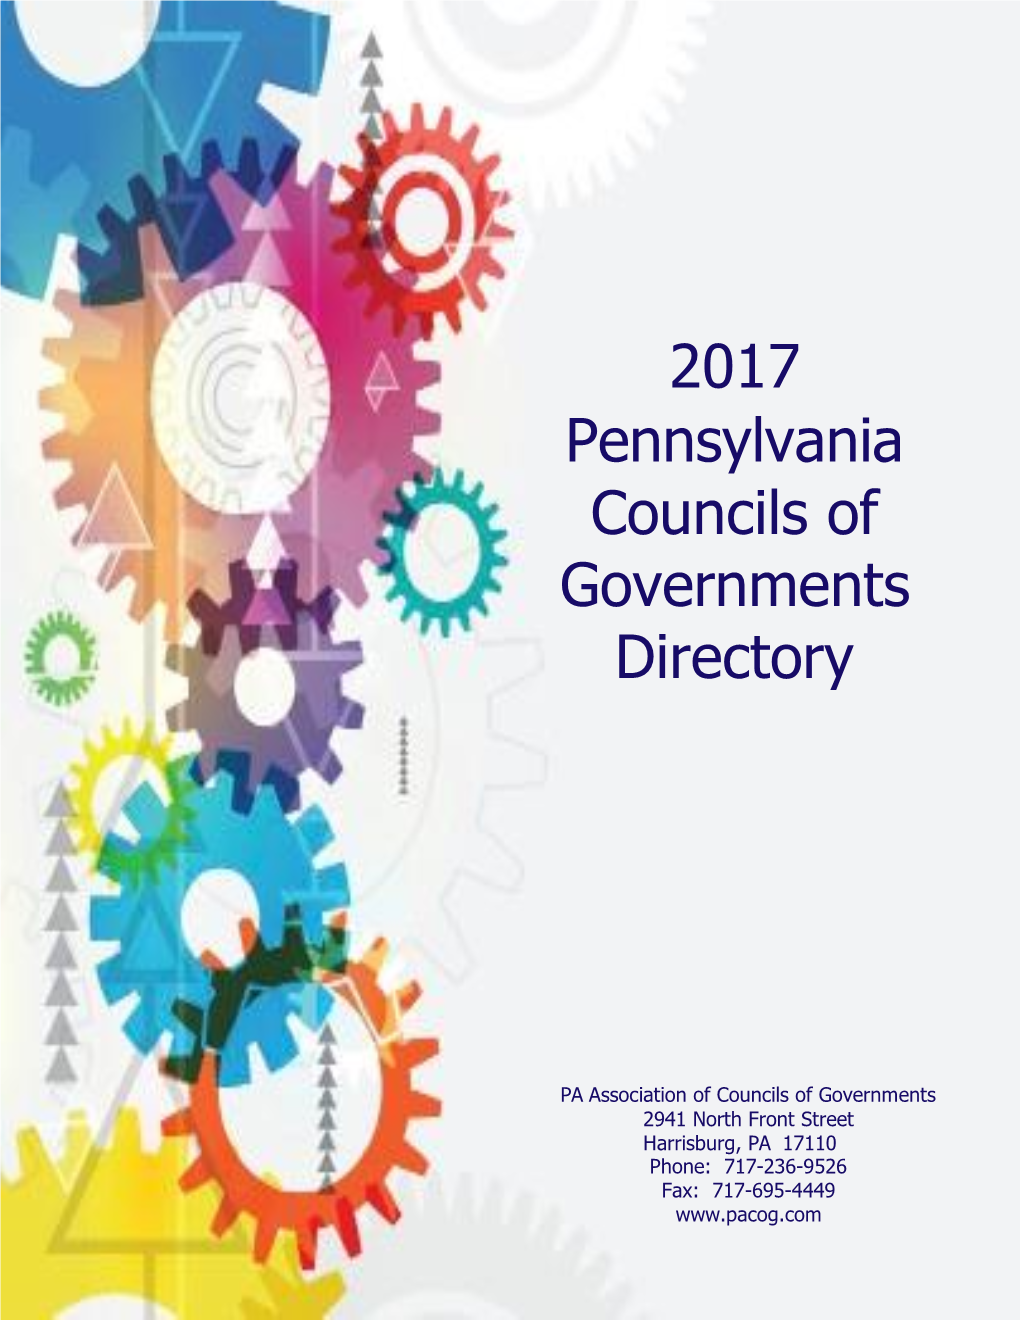 2017 Pennsylvania Councils of Governments Directory